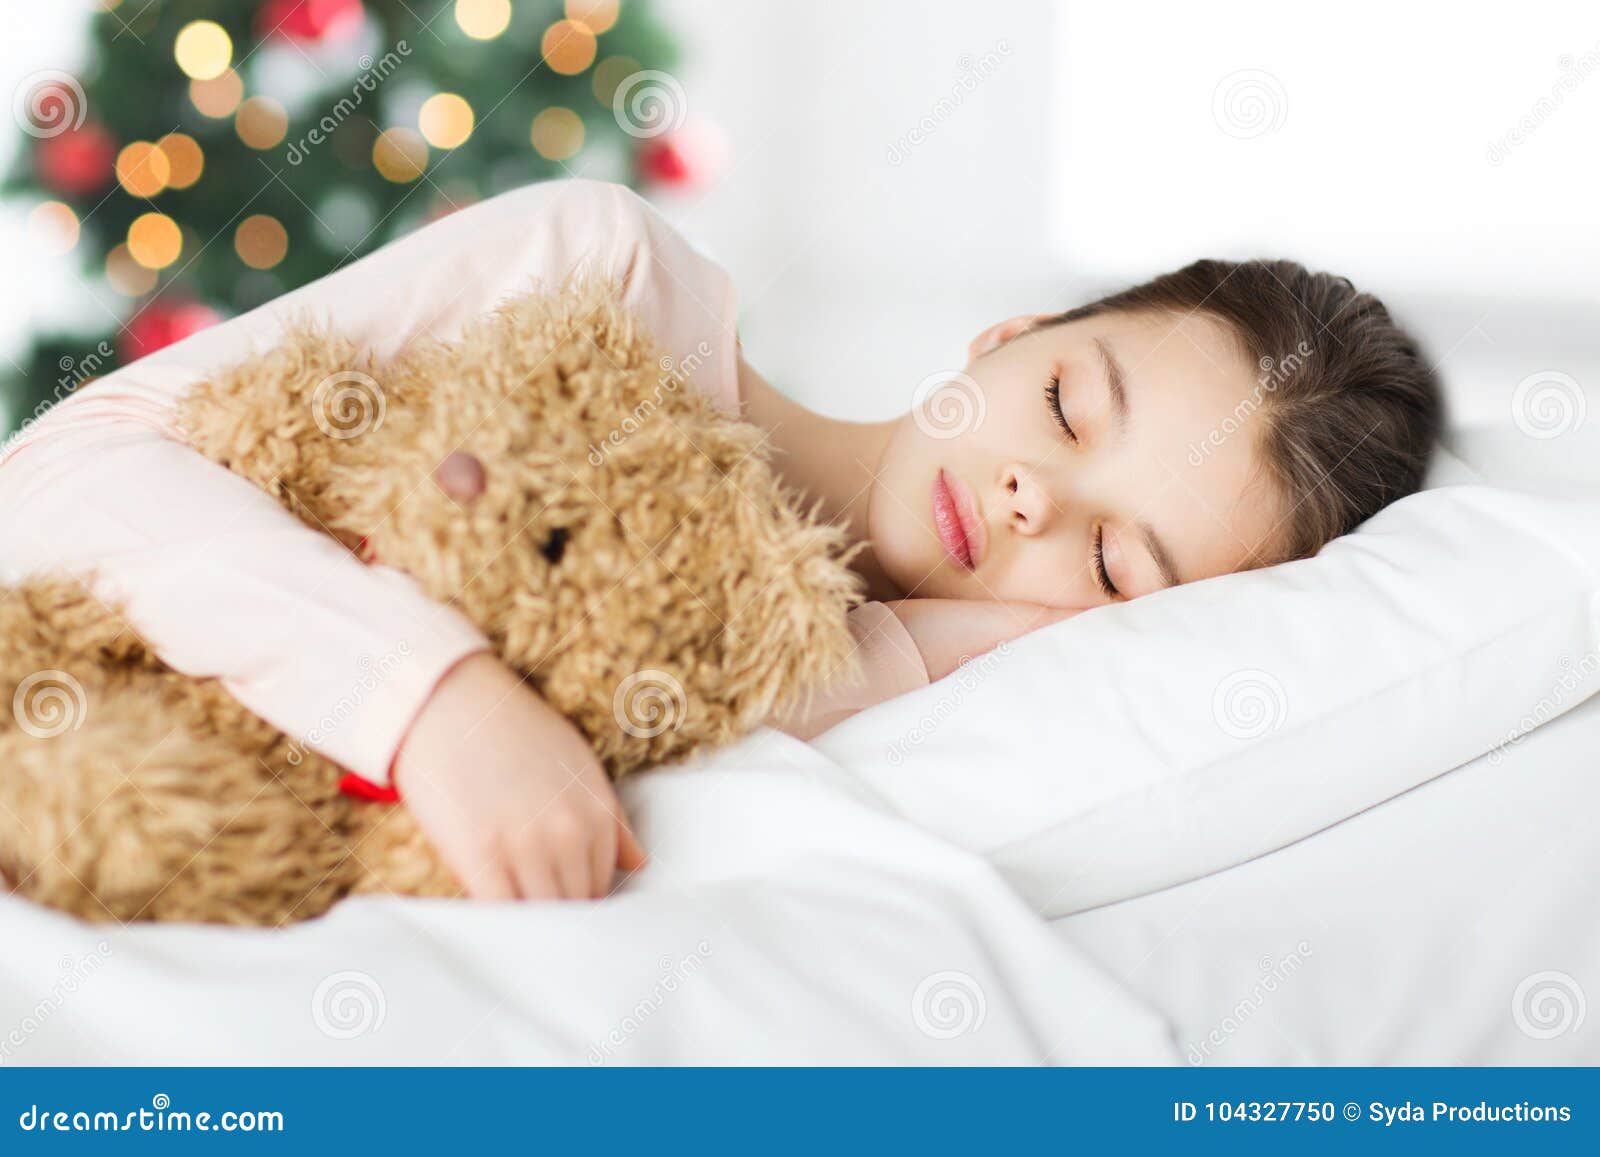 Girl Sleeping with Teddy Bear in Bed at Christmas Stock Photo ...